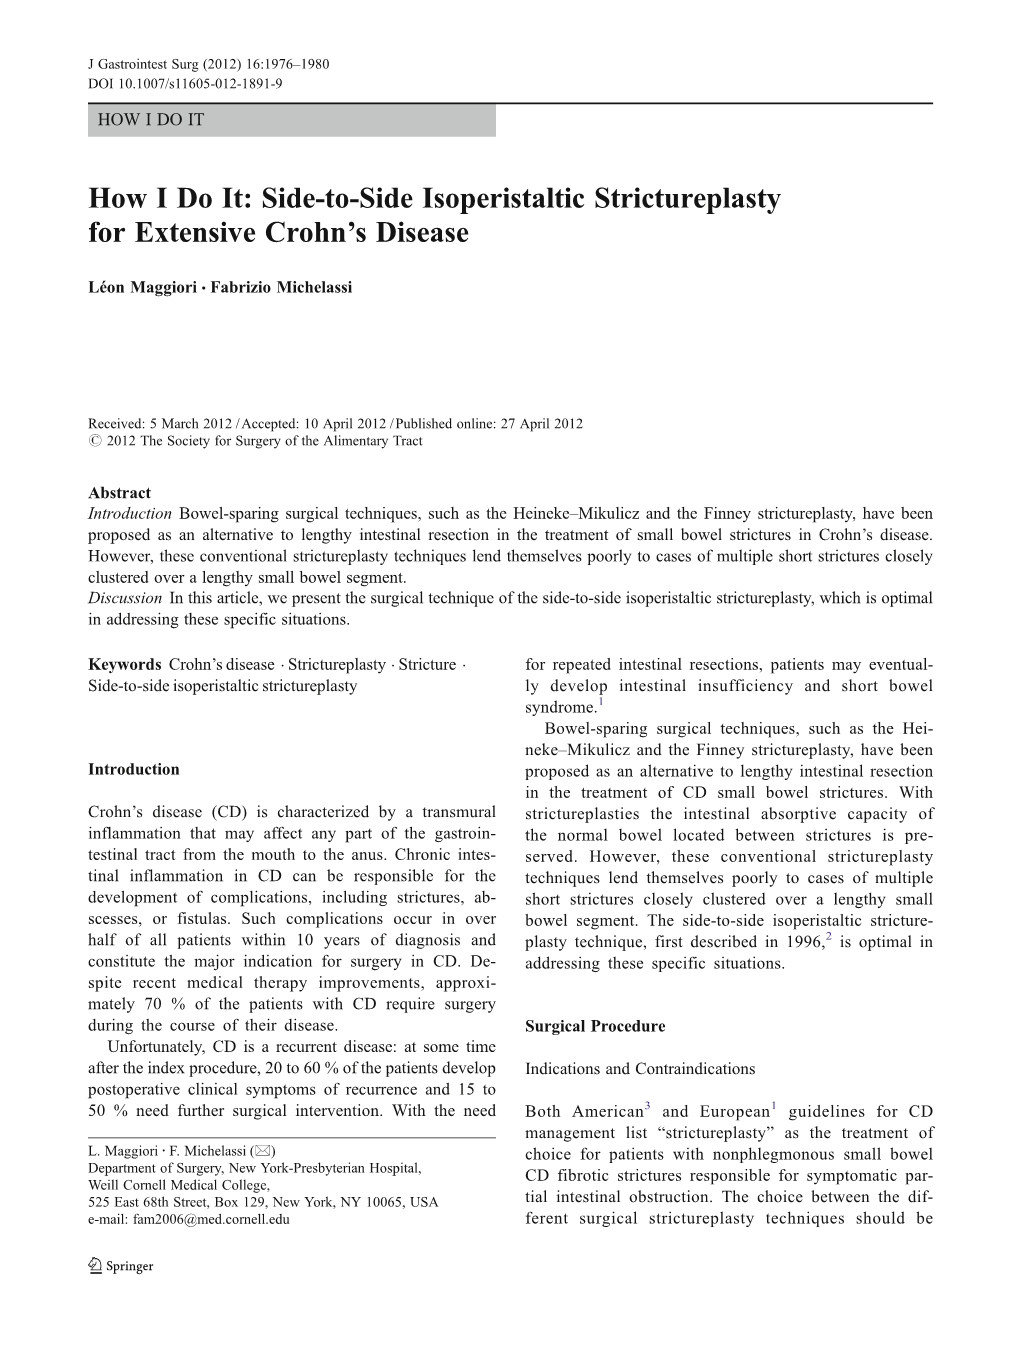 How I Do It: Side-To-Side Isoperistaltic Strictureplasty for Extensive Crohn's